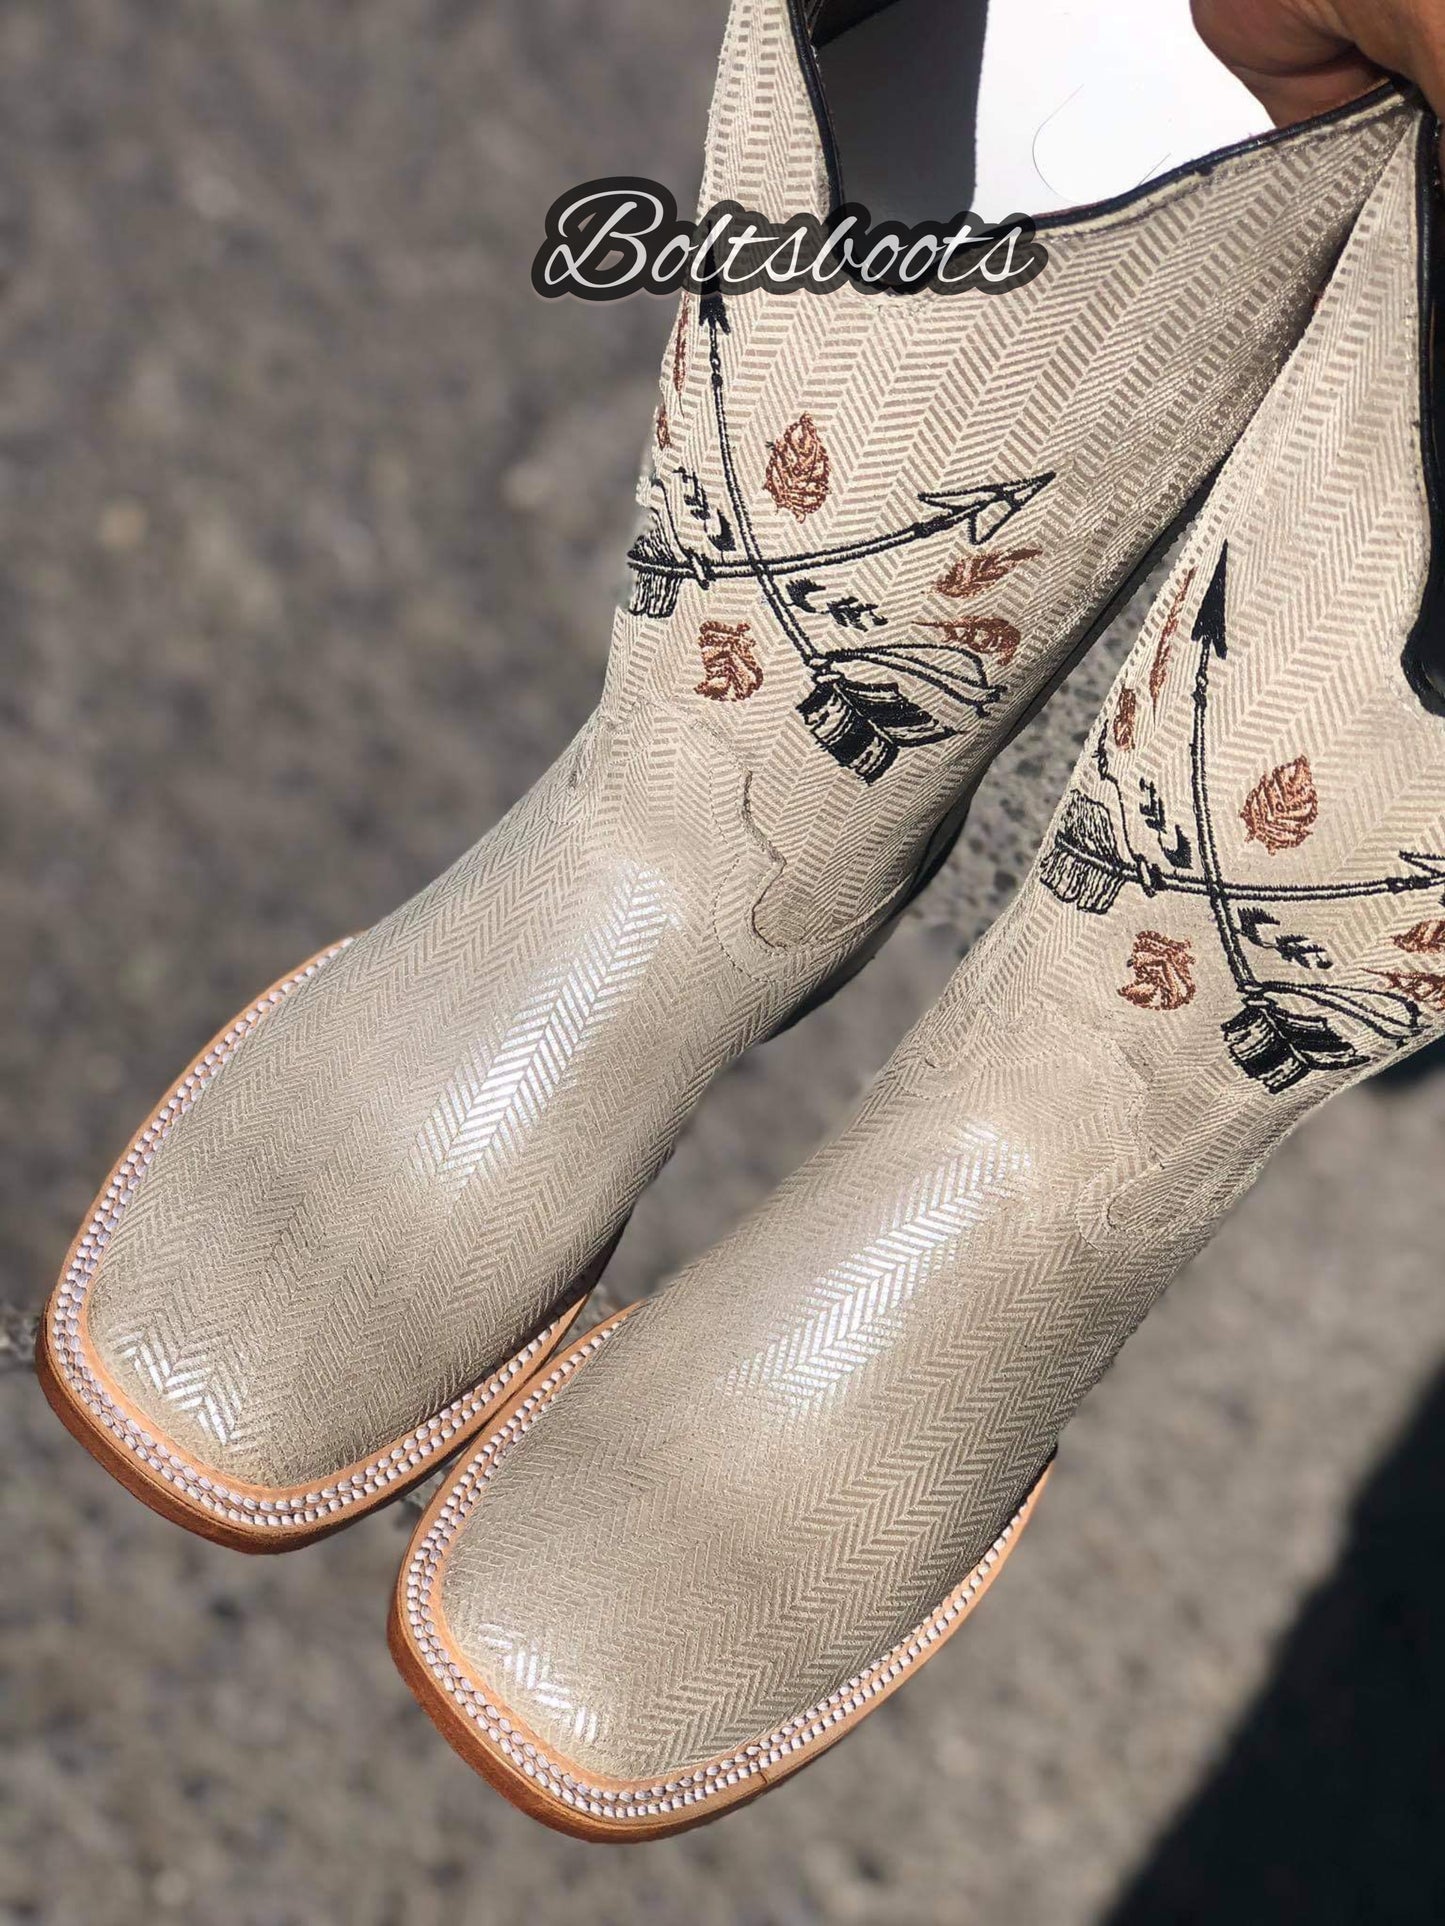 Pearl finas by  (( Boltsbootsbrand))